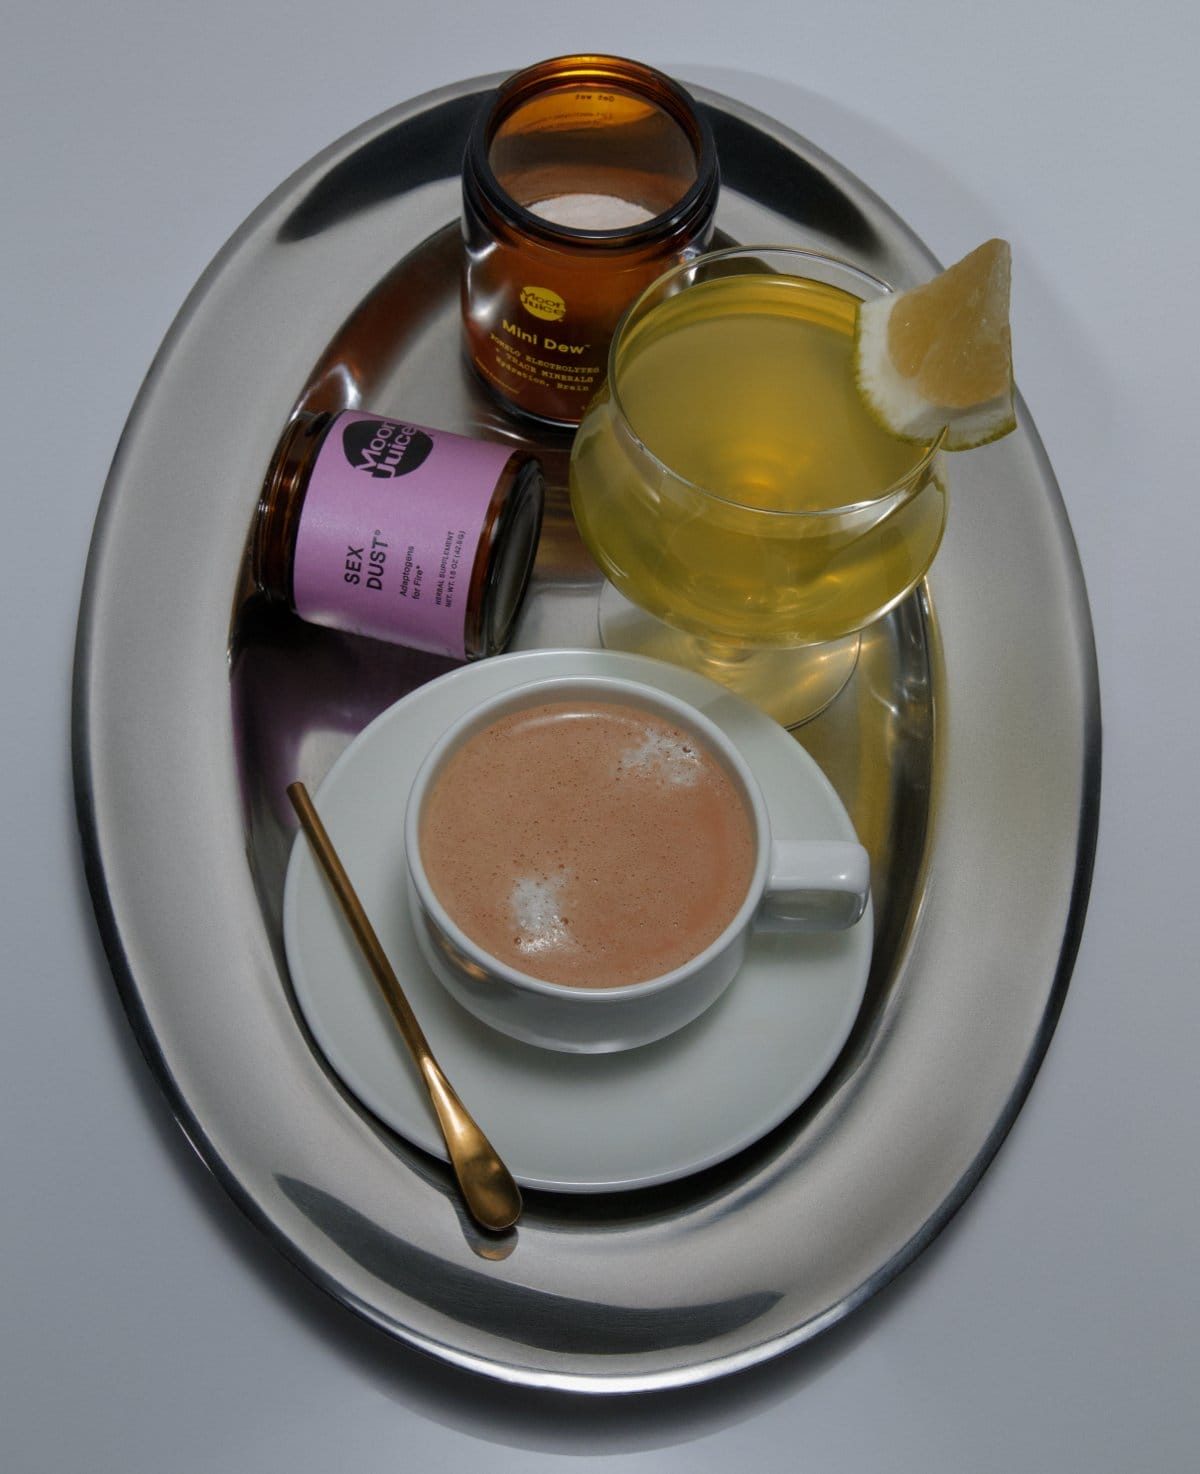 Silver tray with a latte, Mini Dew drink, jar of Sex Dust, and jar of Pomello Mini Dew on it